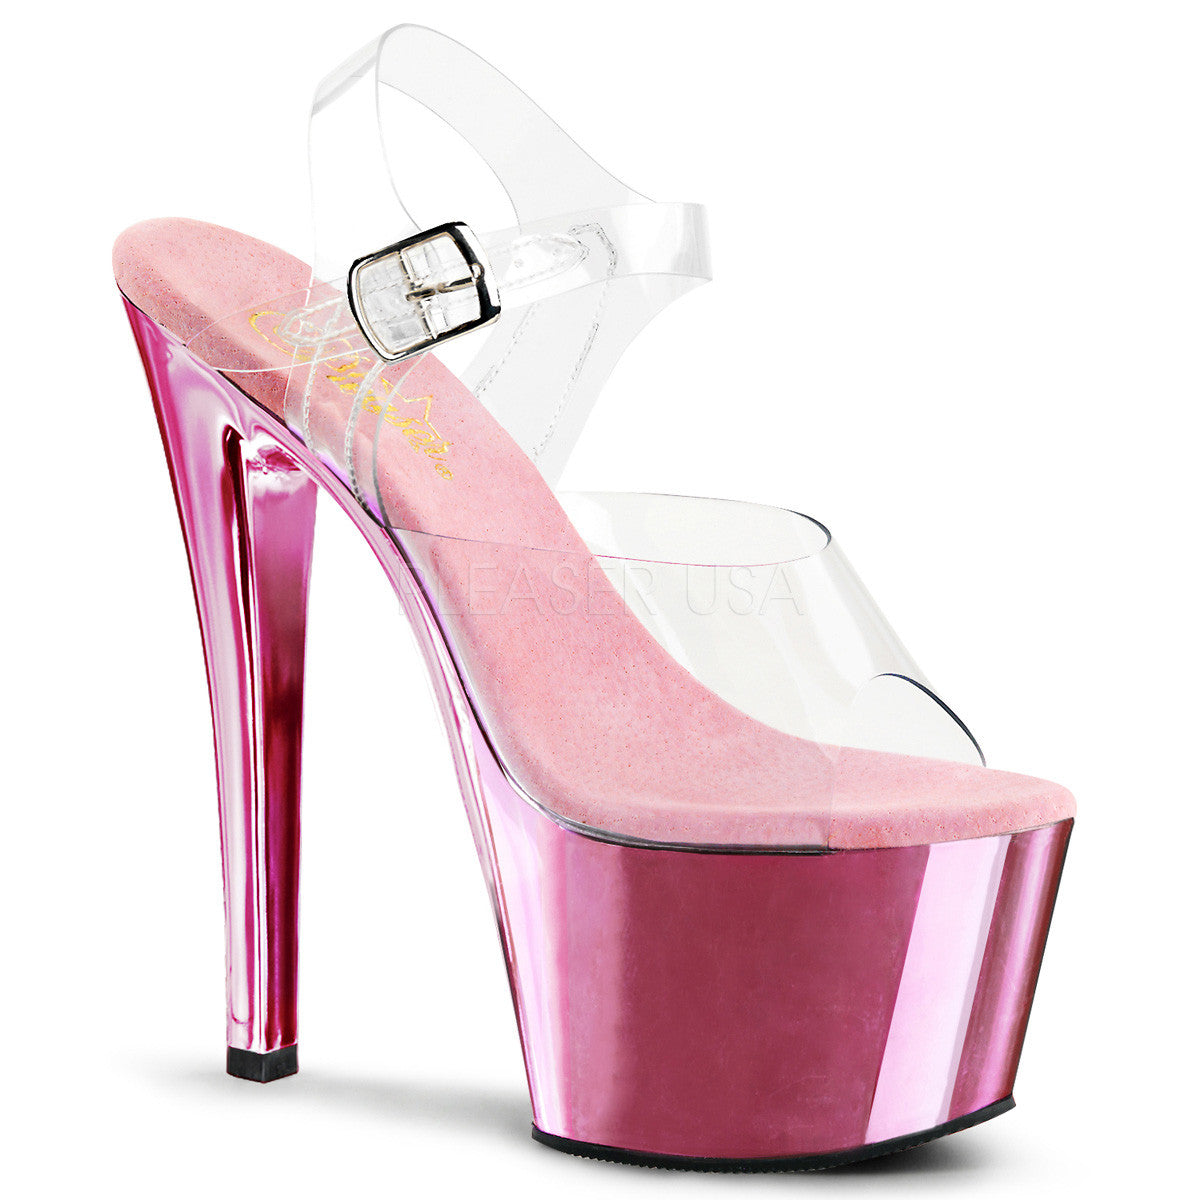 PLEASER SKY-308 Clear-Baby Pink Chrome Ankle Strap Sandals - Shoecup.com